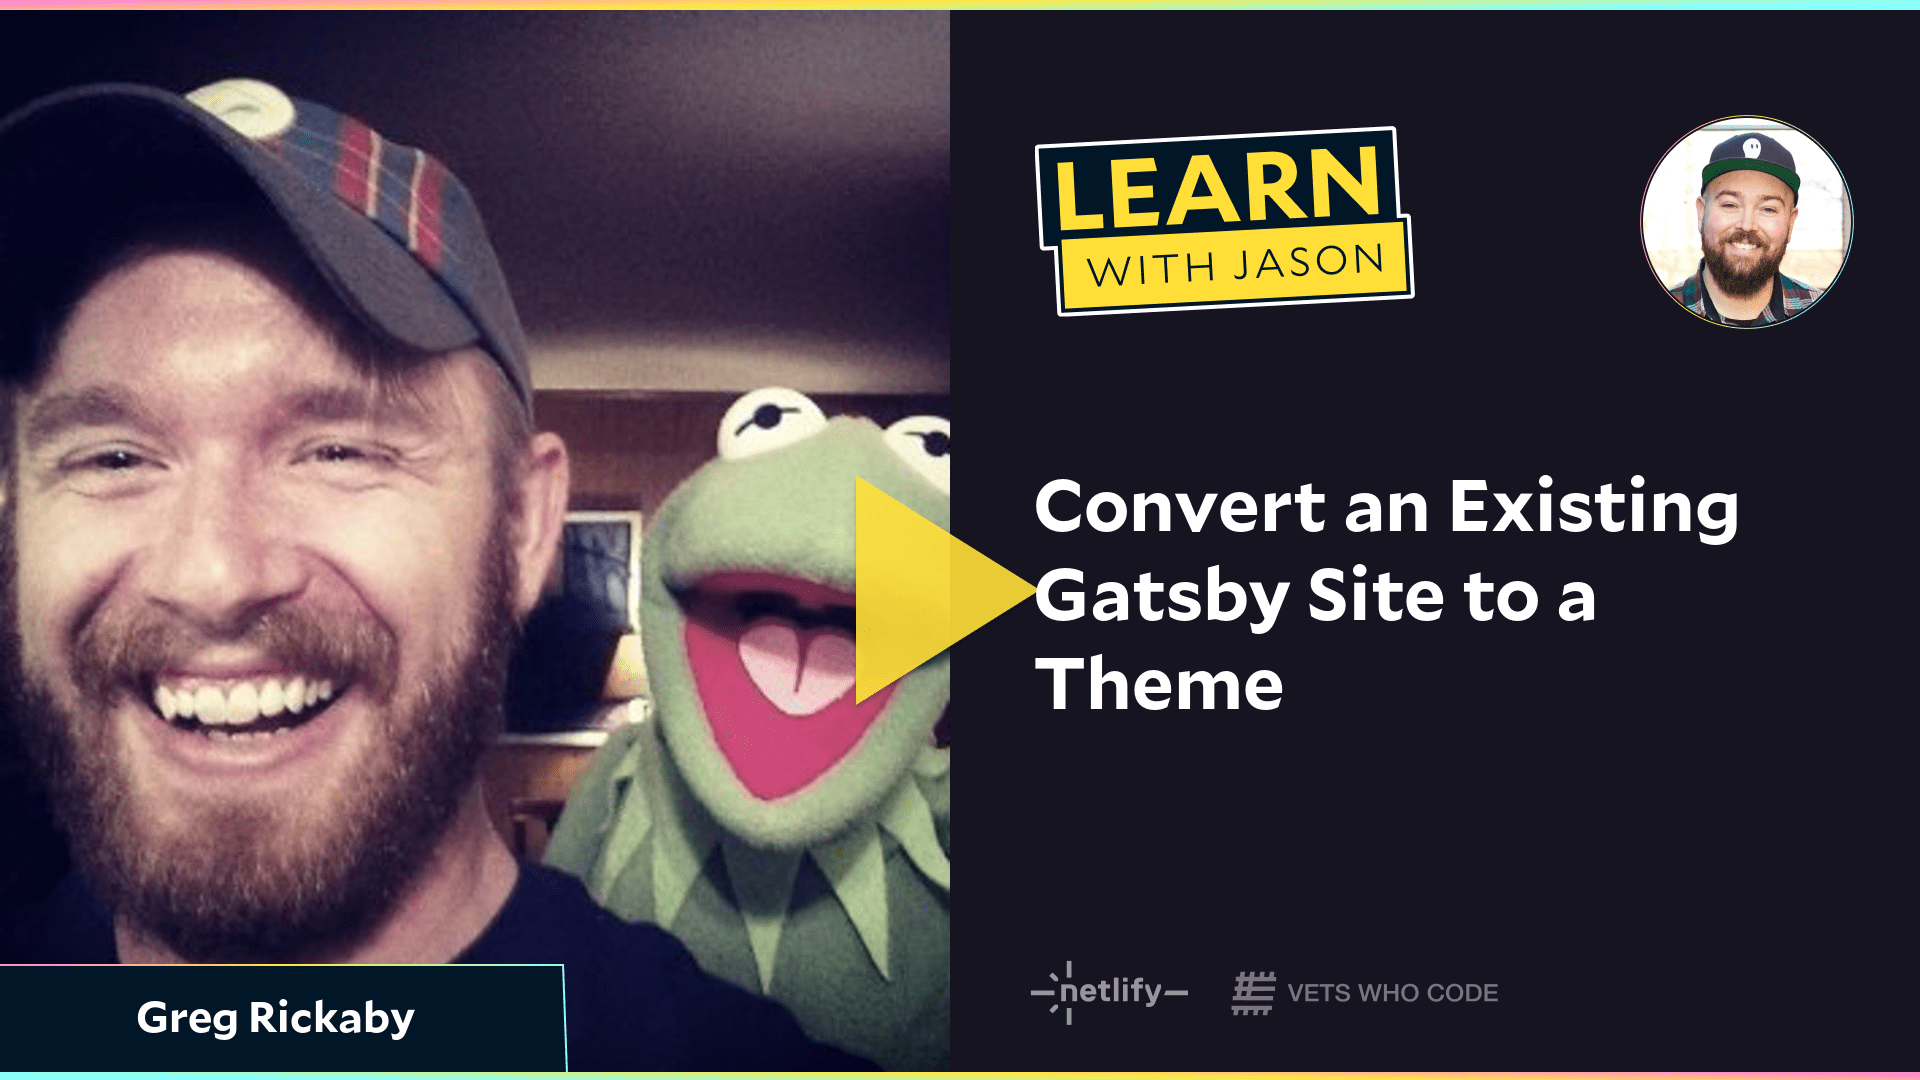 Convert an Existing Gatsby Site to a Theme (with Greg Rickaby)